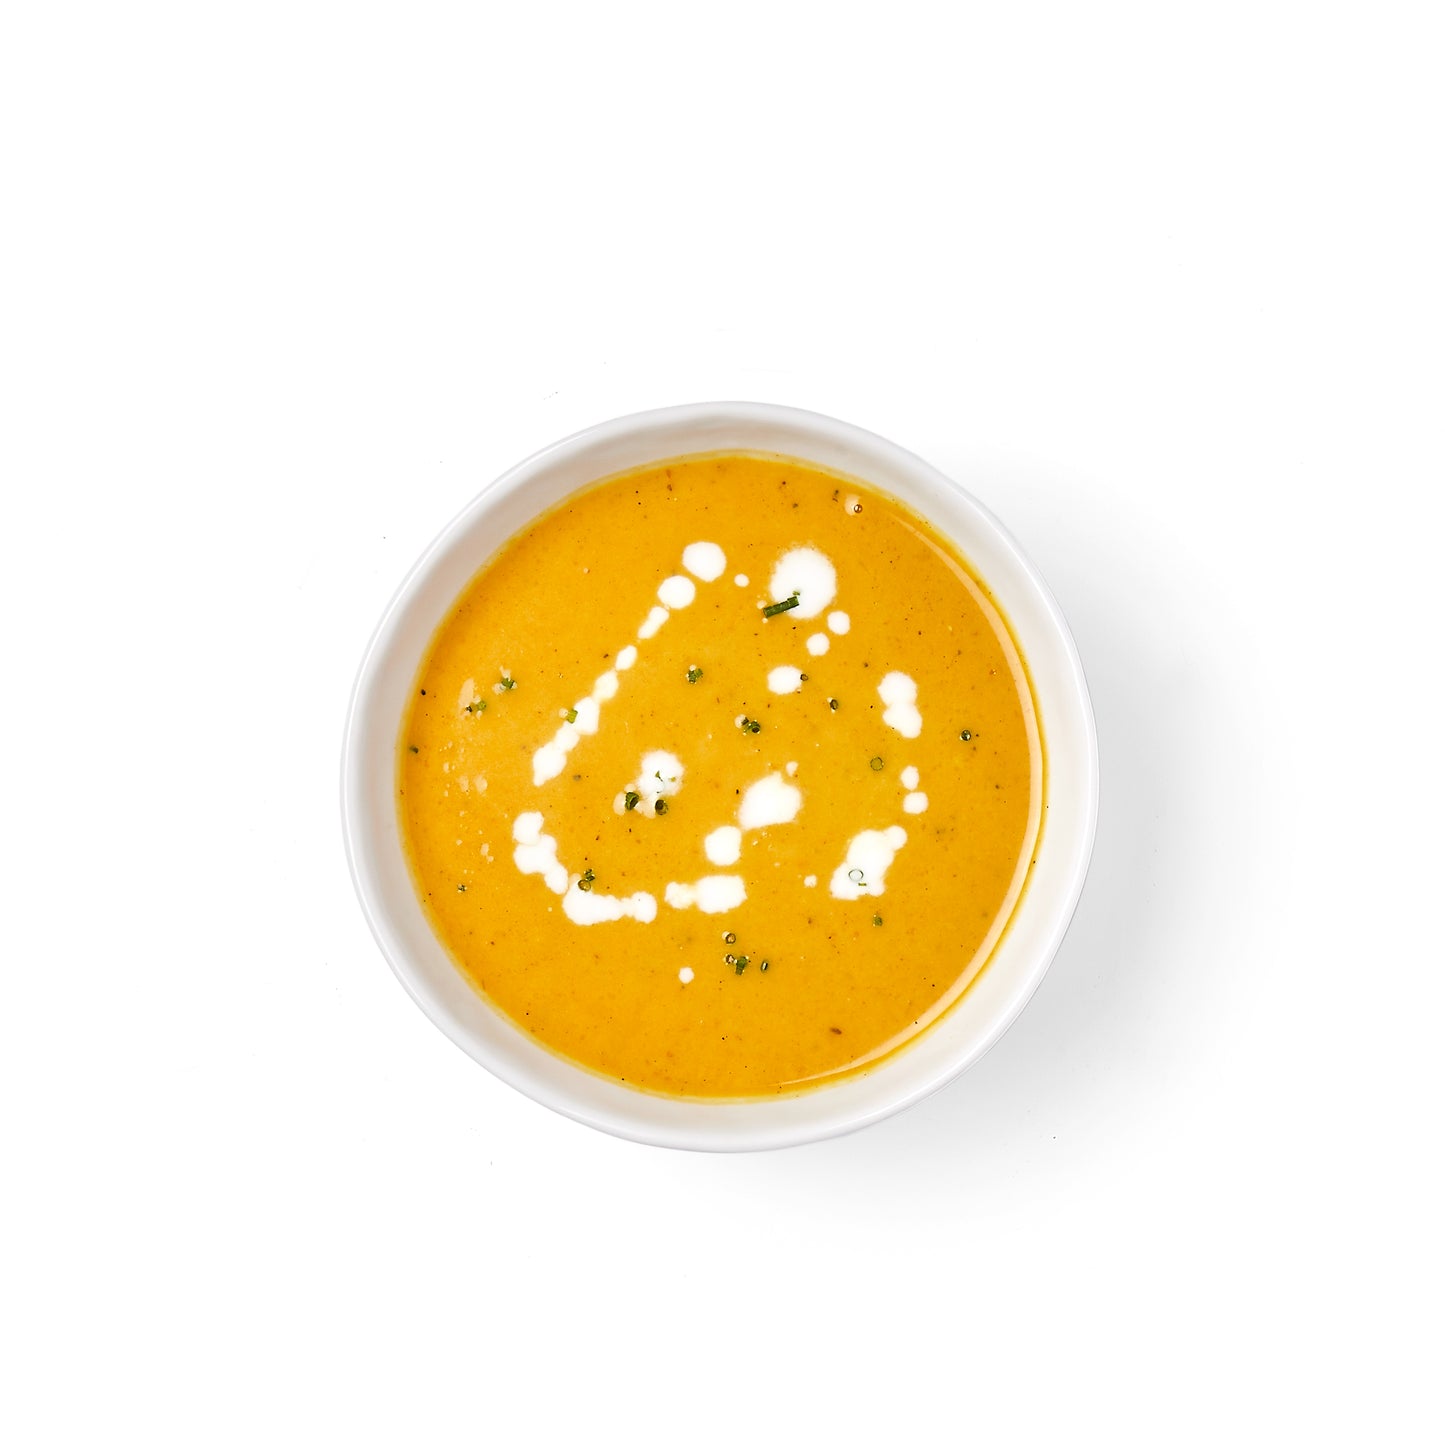 coconut curry butternut bisque azuluna foods Premium Pasture-Raised ready-to-eat Meals Delivery